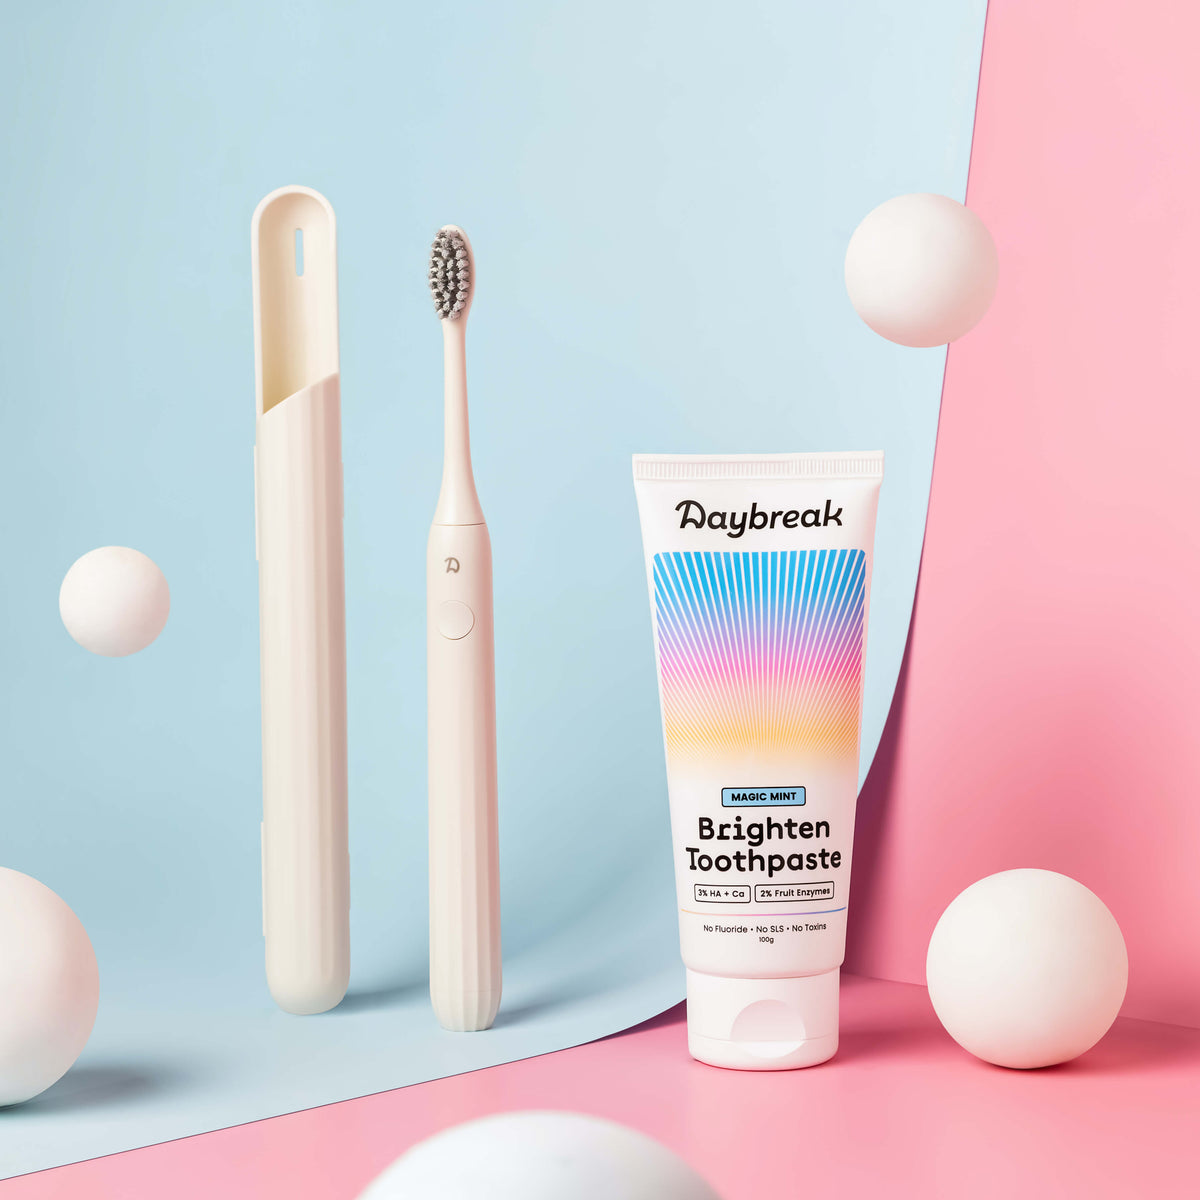 Buzzz sonic toothbrush and Daybreak Brighten toothpaste for a healthier mouth